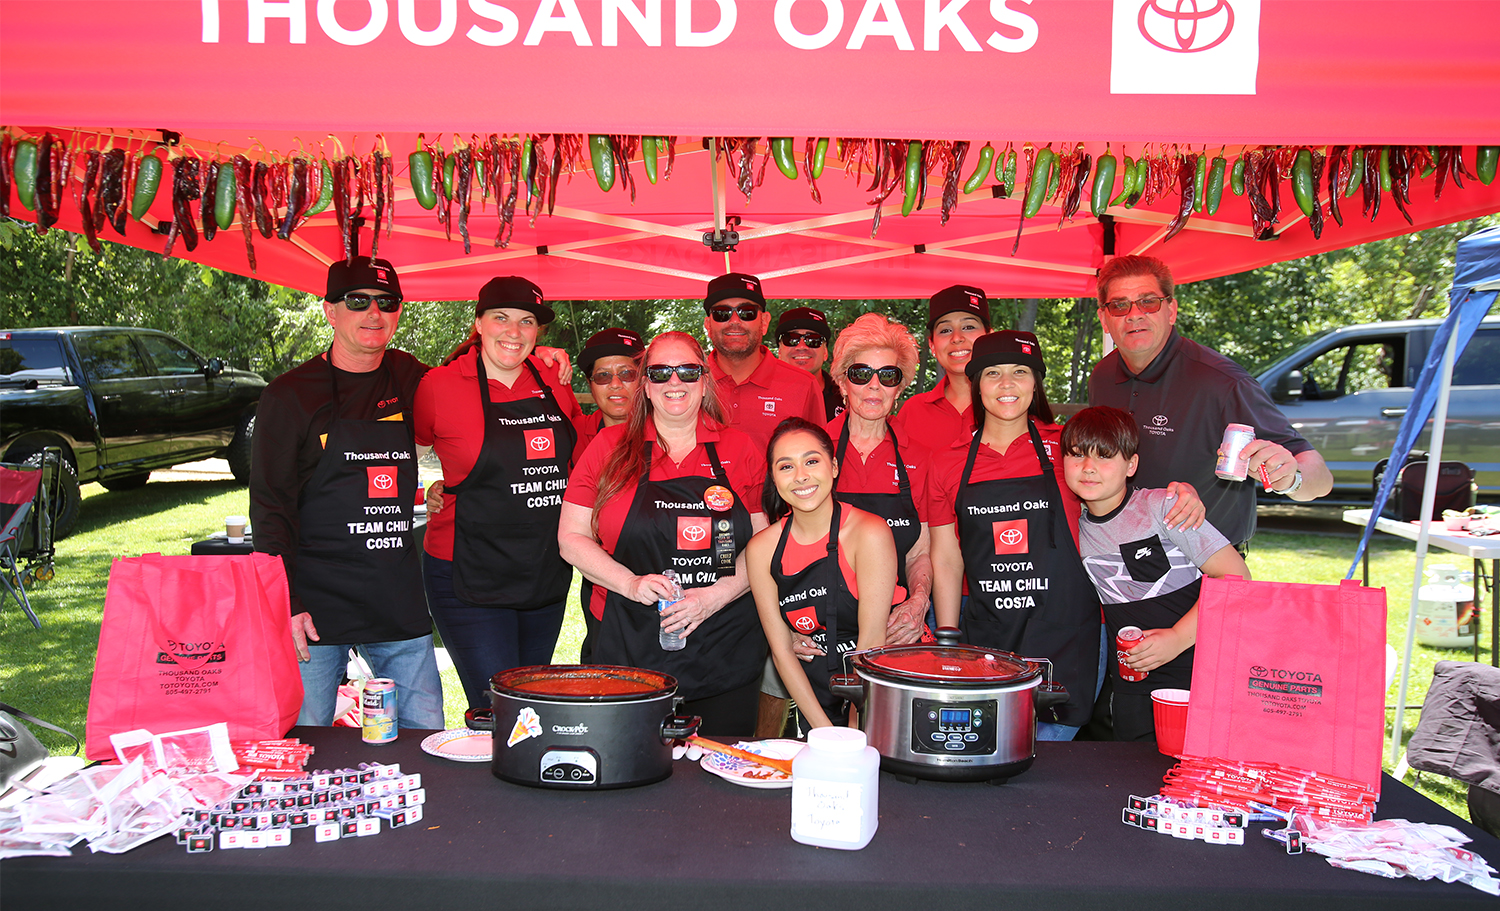 Thousand Oaks Chili Cook Off, Car Show, and Craft Brew Festival